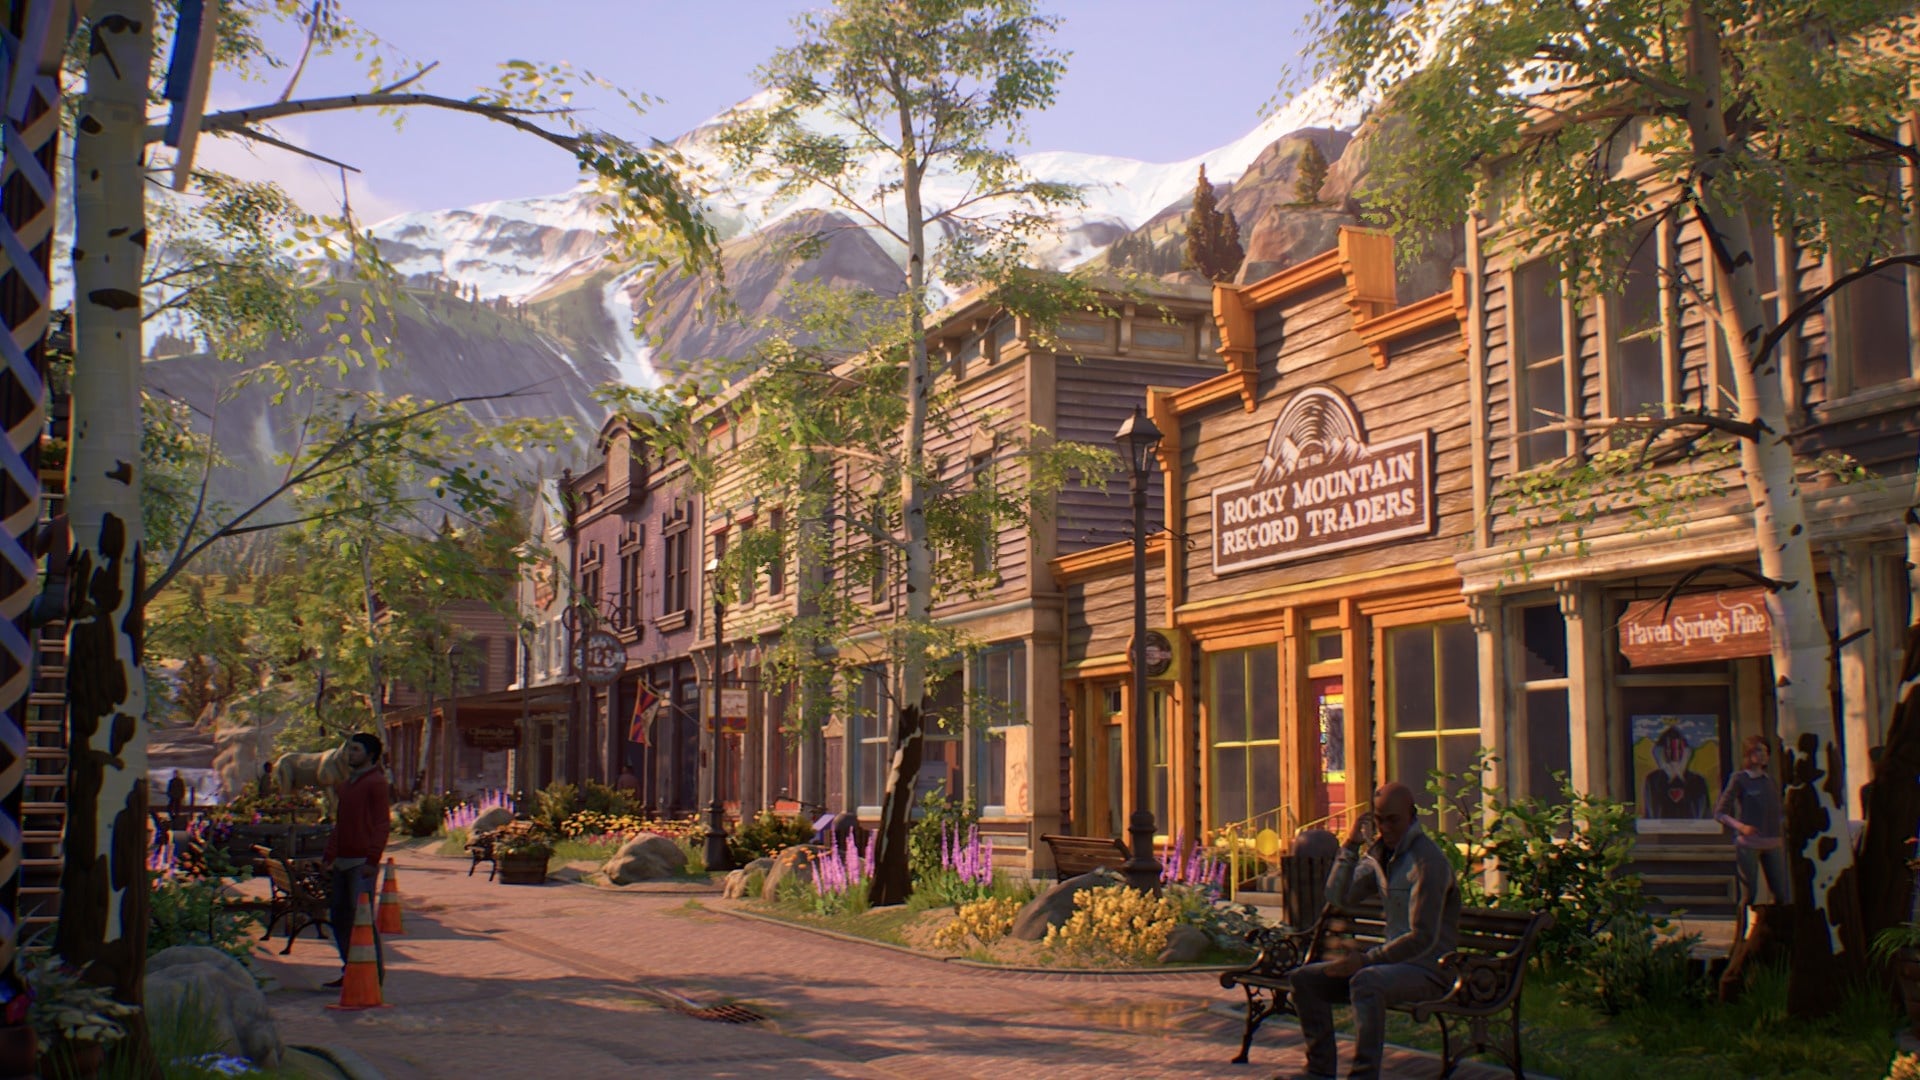 Sun-soaked Haven Springs invites exploration and browsing of quaint shops at every turn.